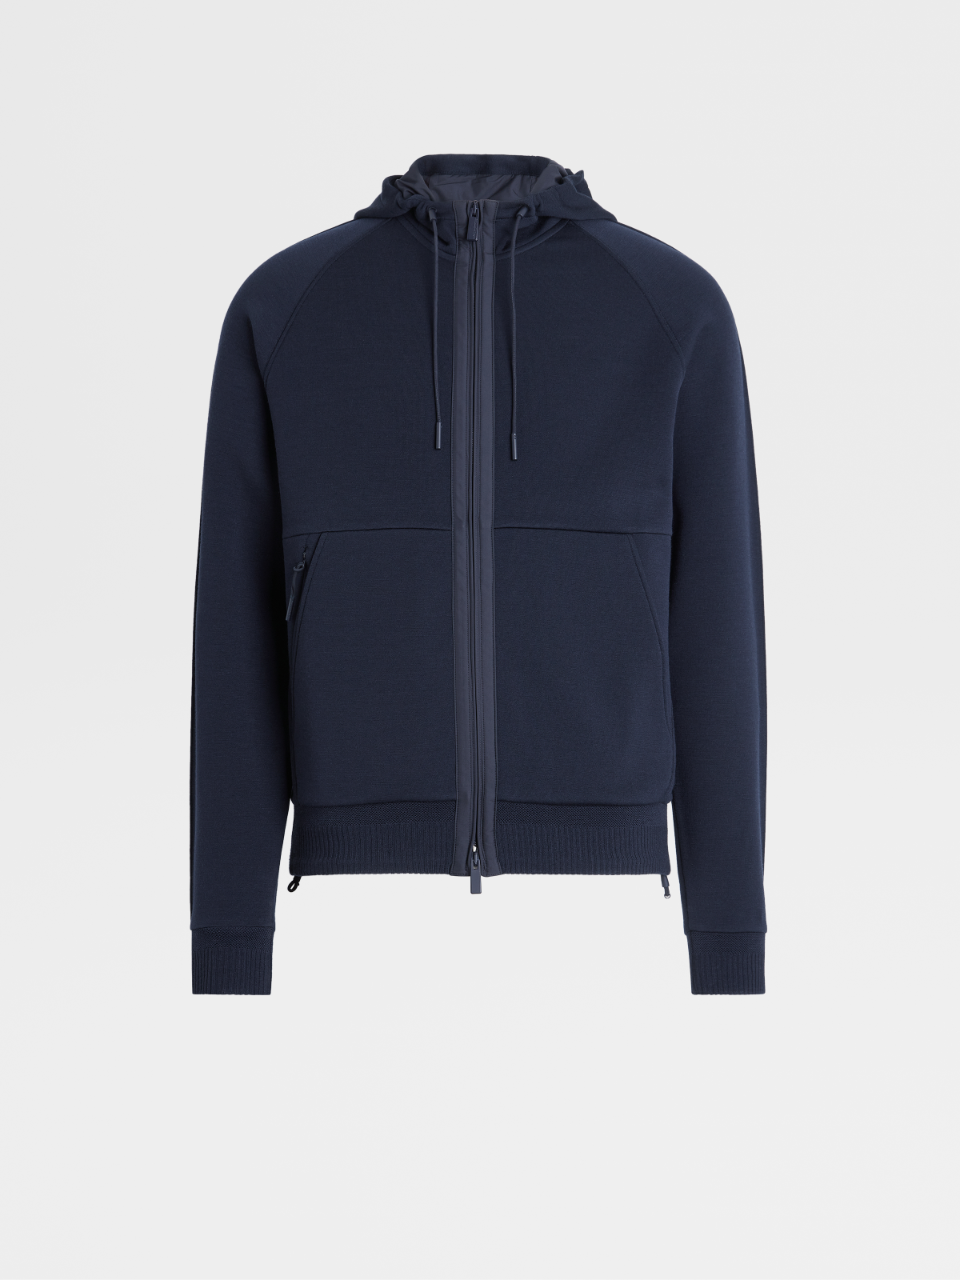 High Performance™ Wool and Spacer Cotton Hooded Full Zip Sweatshirt